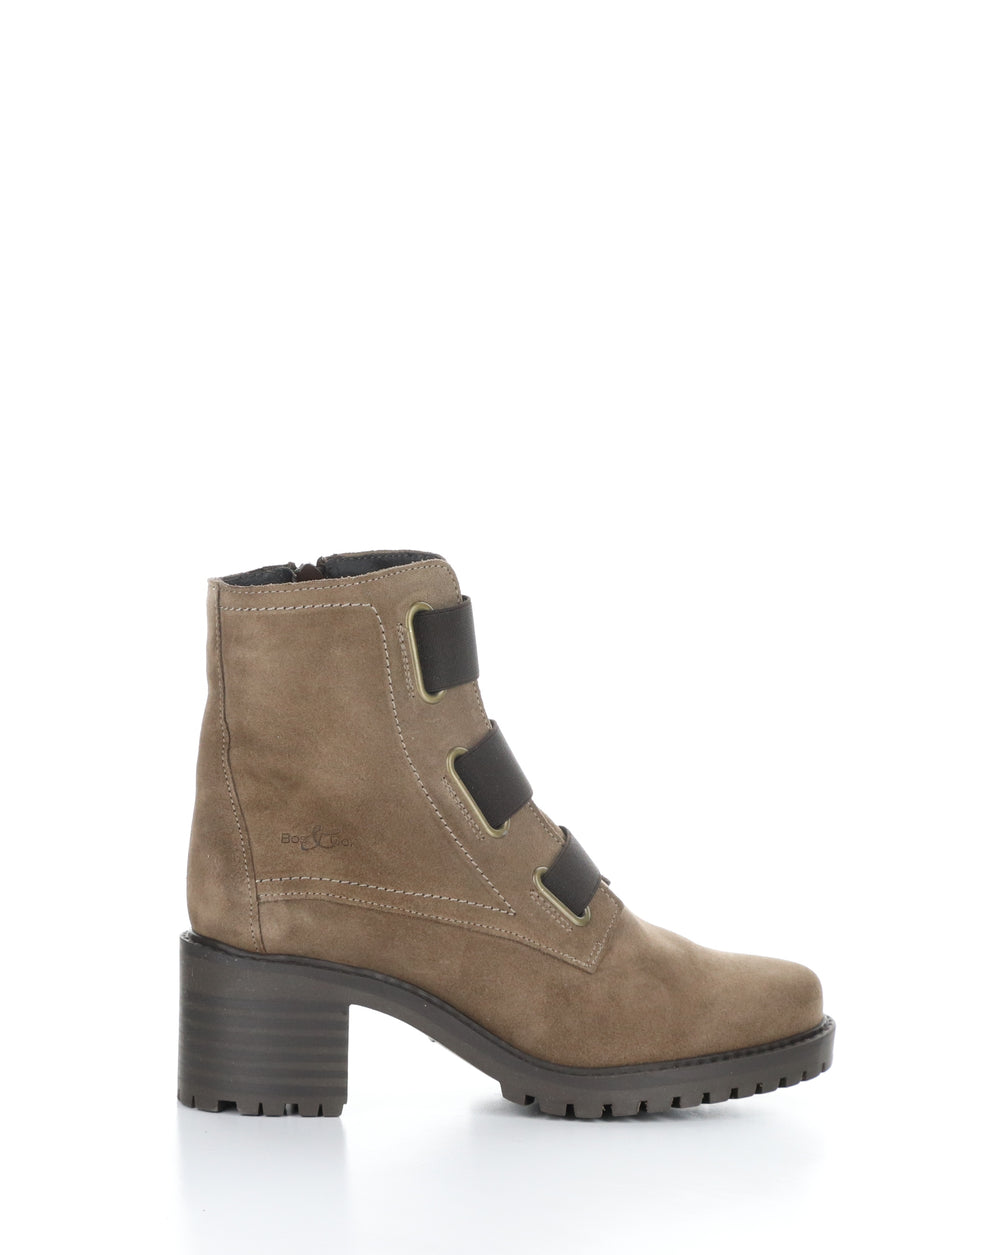 INDIE TAUPE/DKBROWN Elasticated Boots